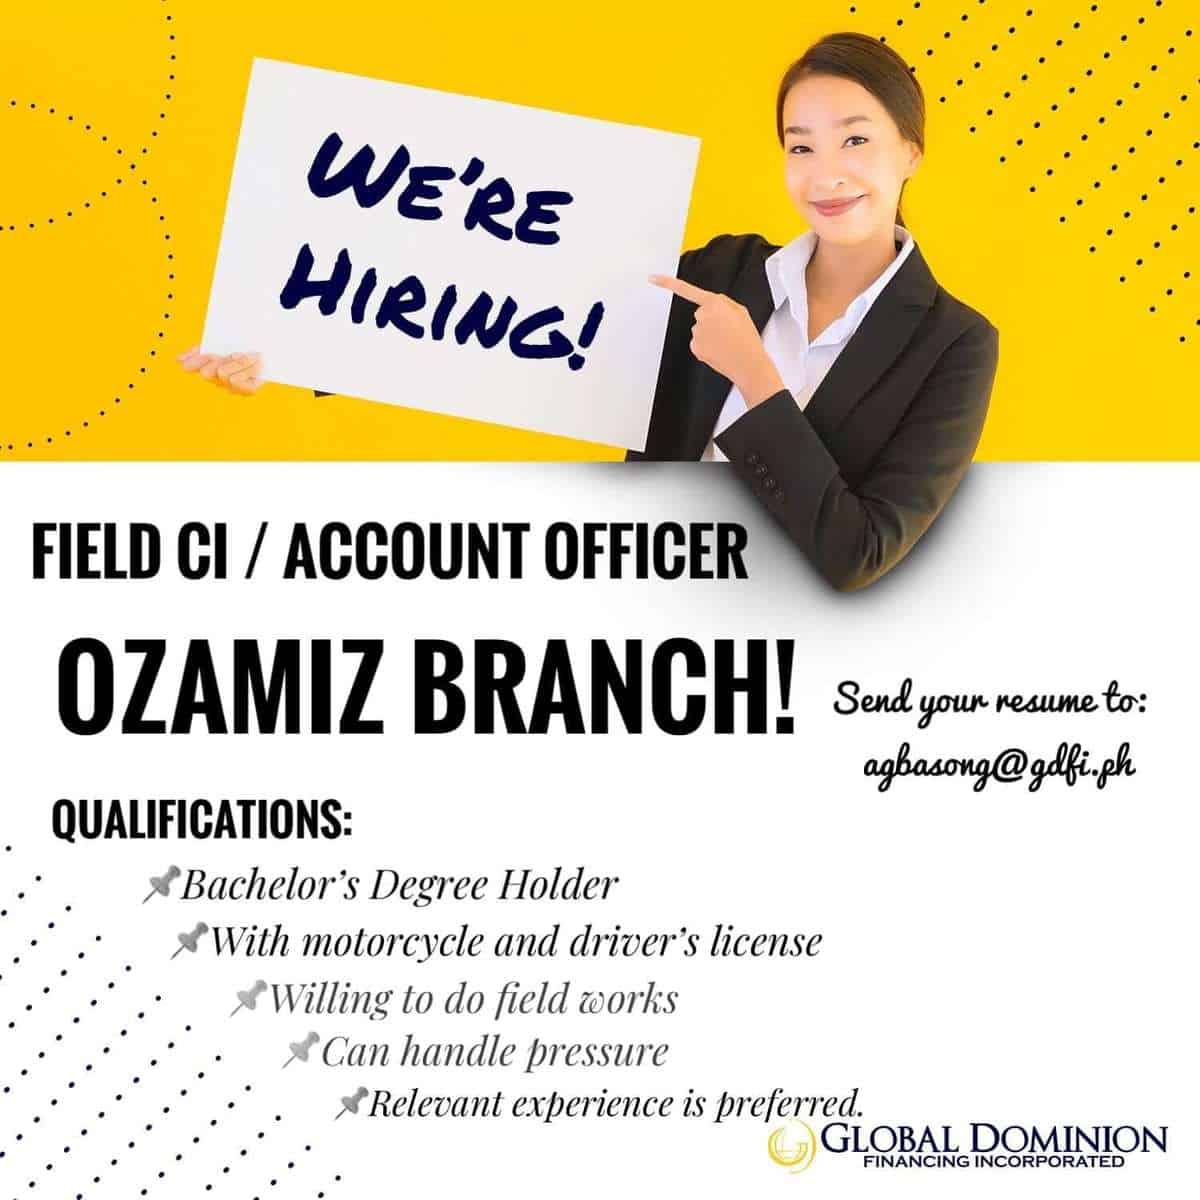 Field CI or Account Officer - Misamis Occidental Jobs